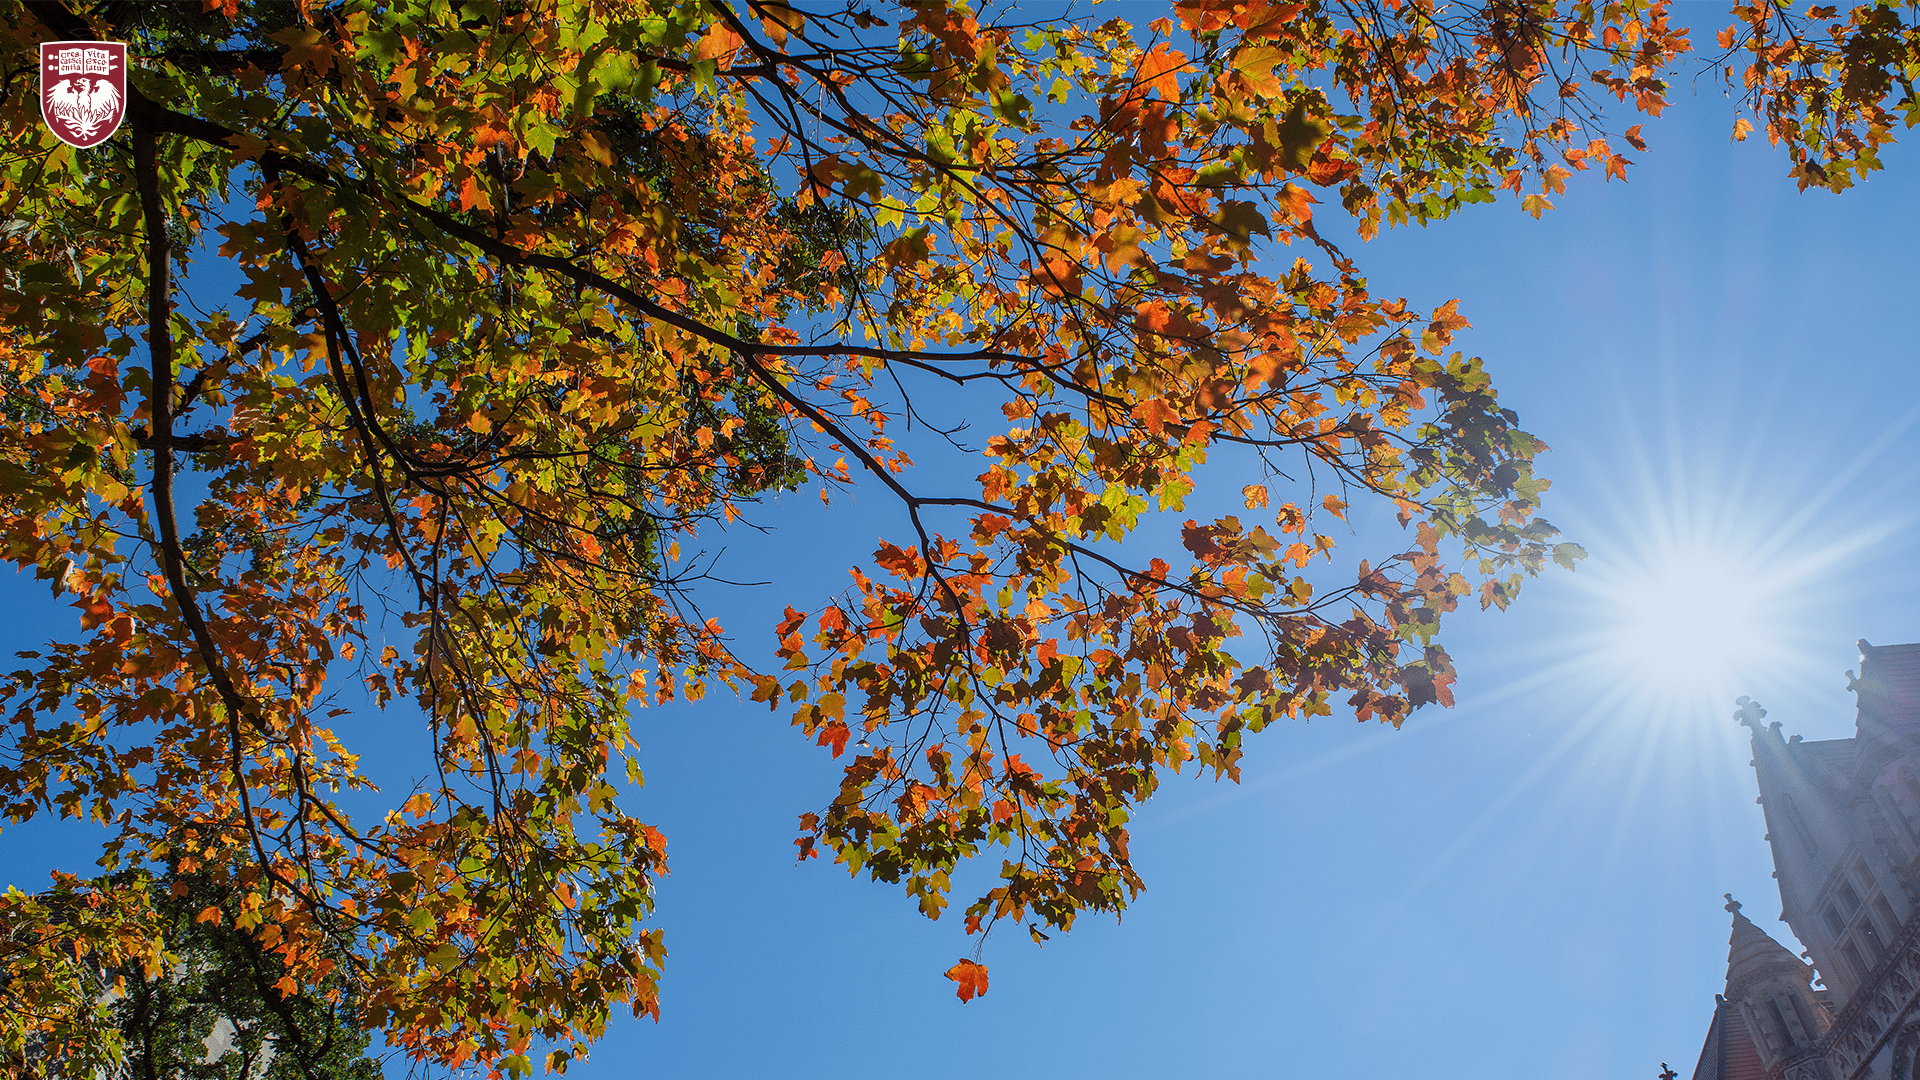 Looking up at a tree branch with red, green, and orange leaves on a bright sunny day